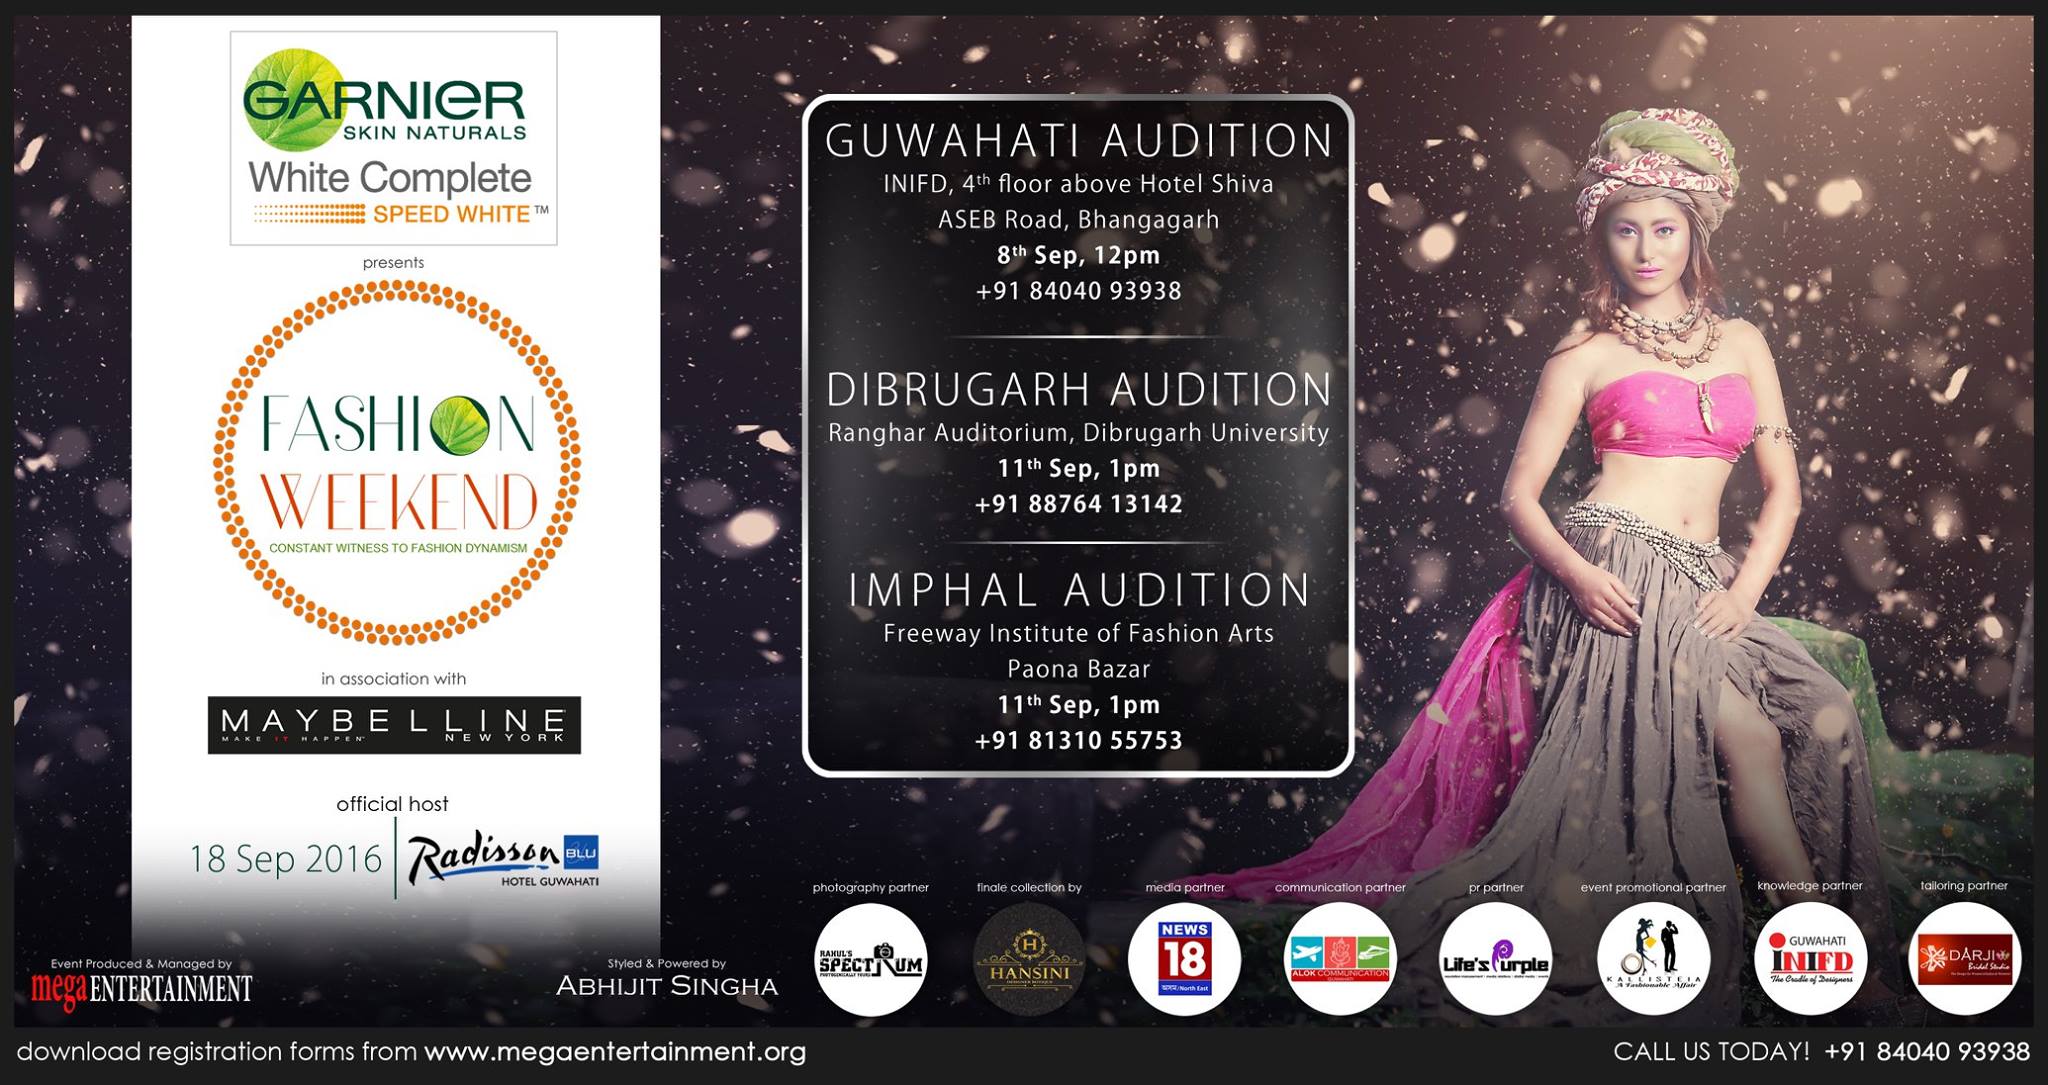  Audition for Garnier White Complete Fashion Weekend in Imphal  